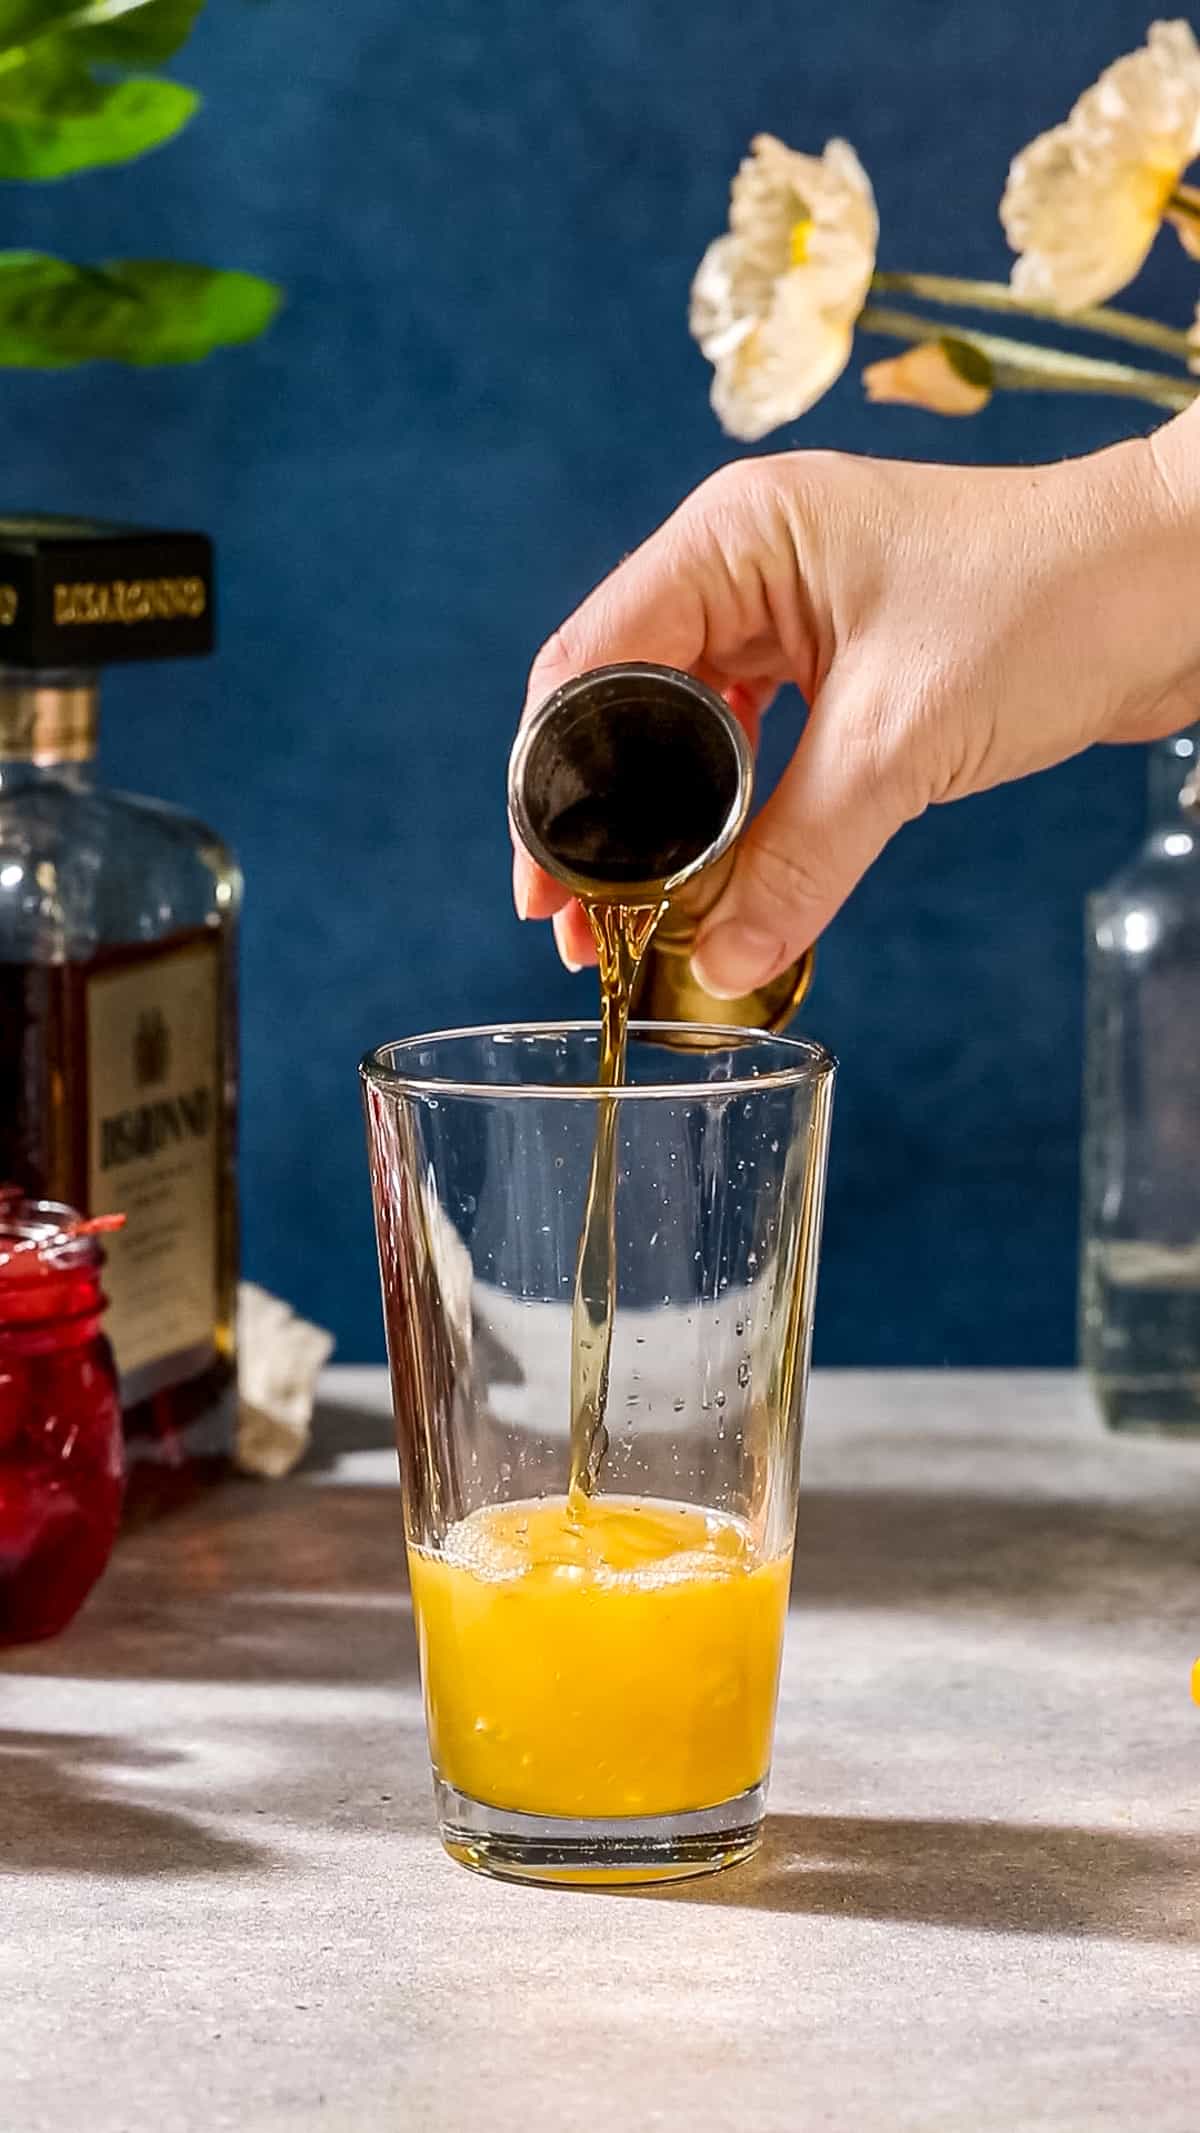 Pouring the amaretto into the cocktail shaker glass.